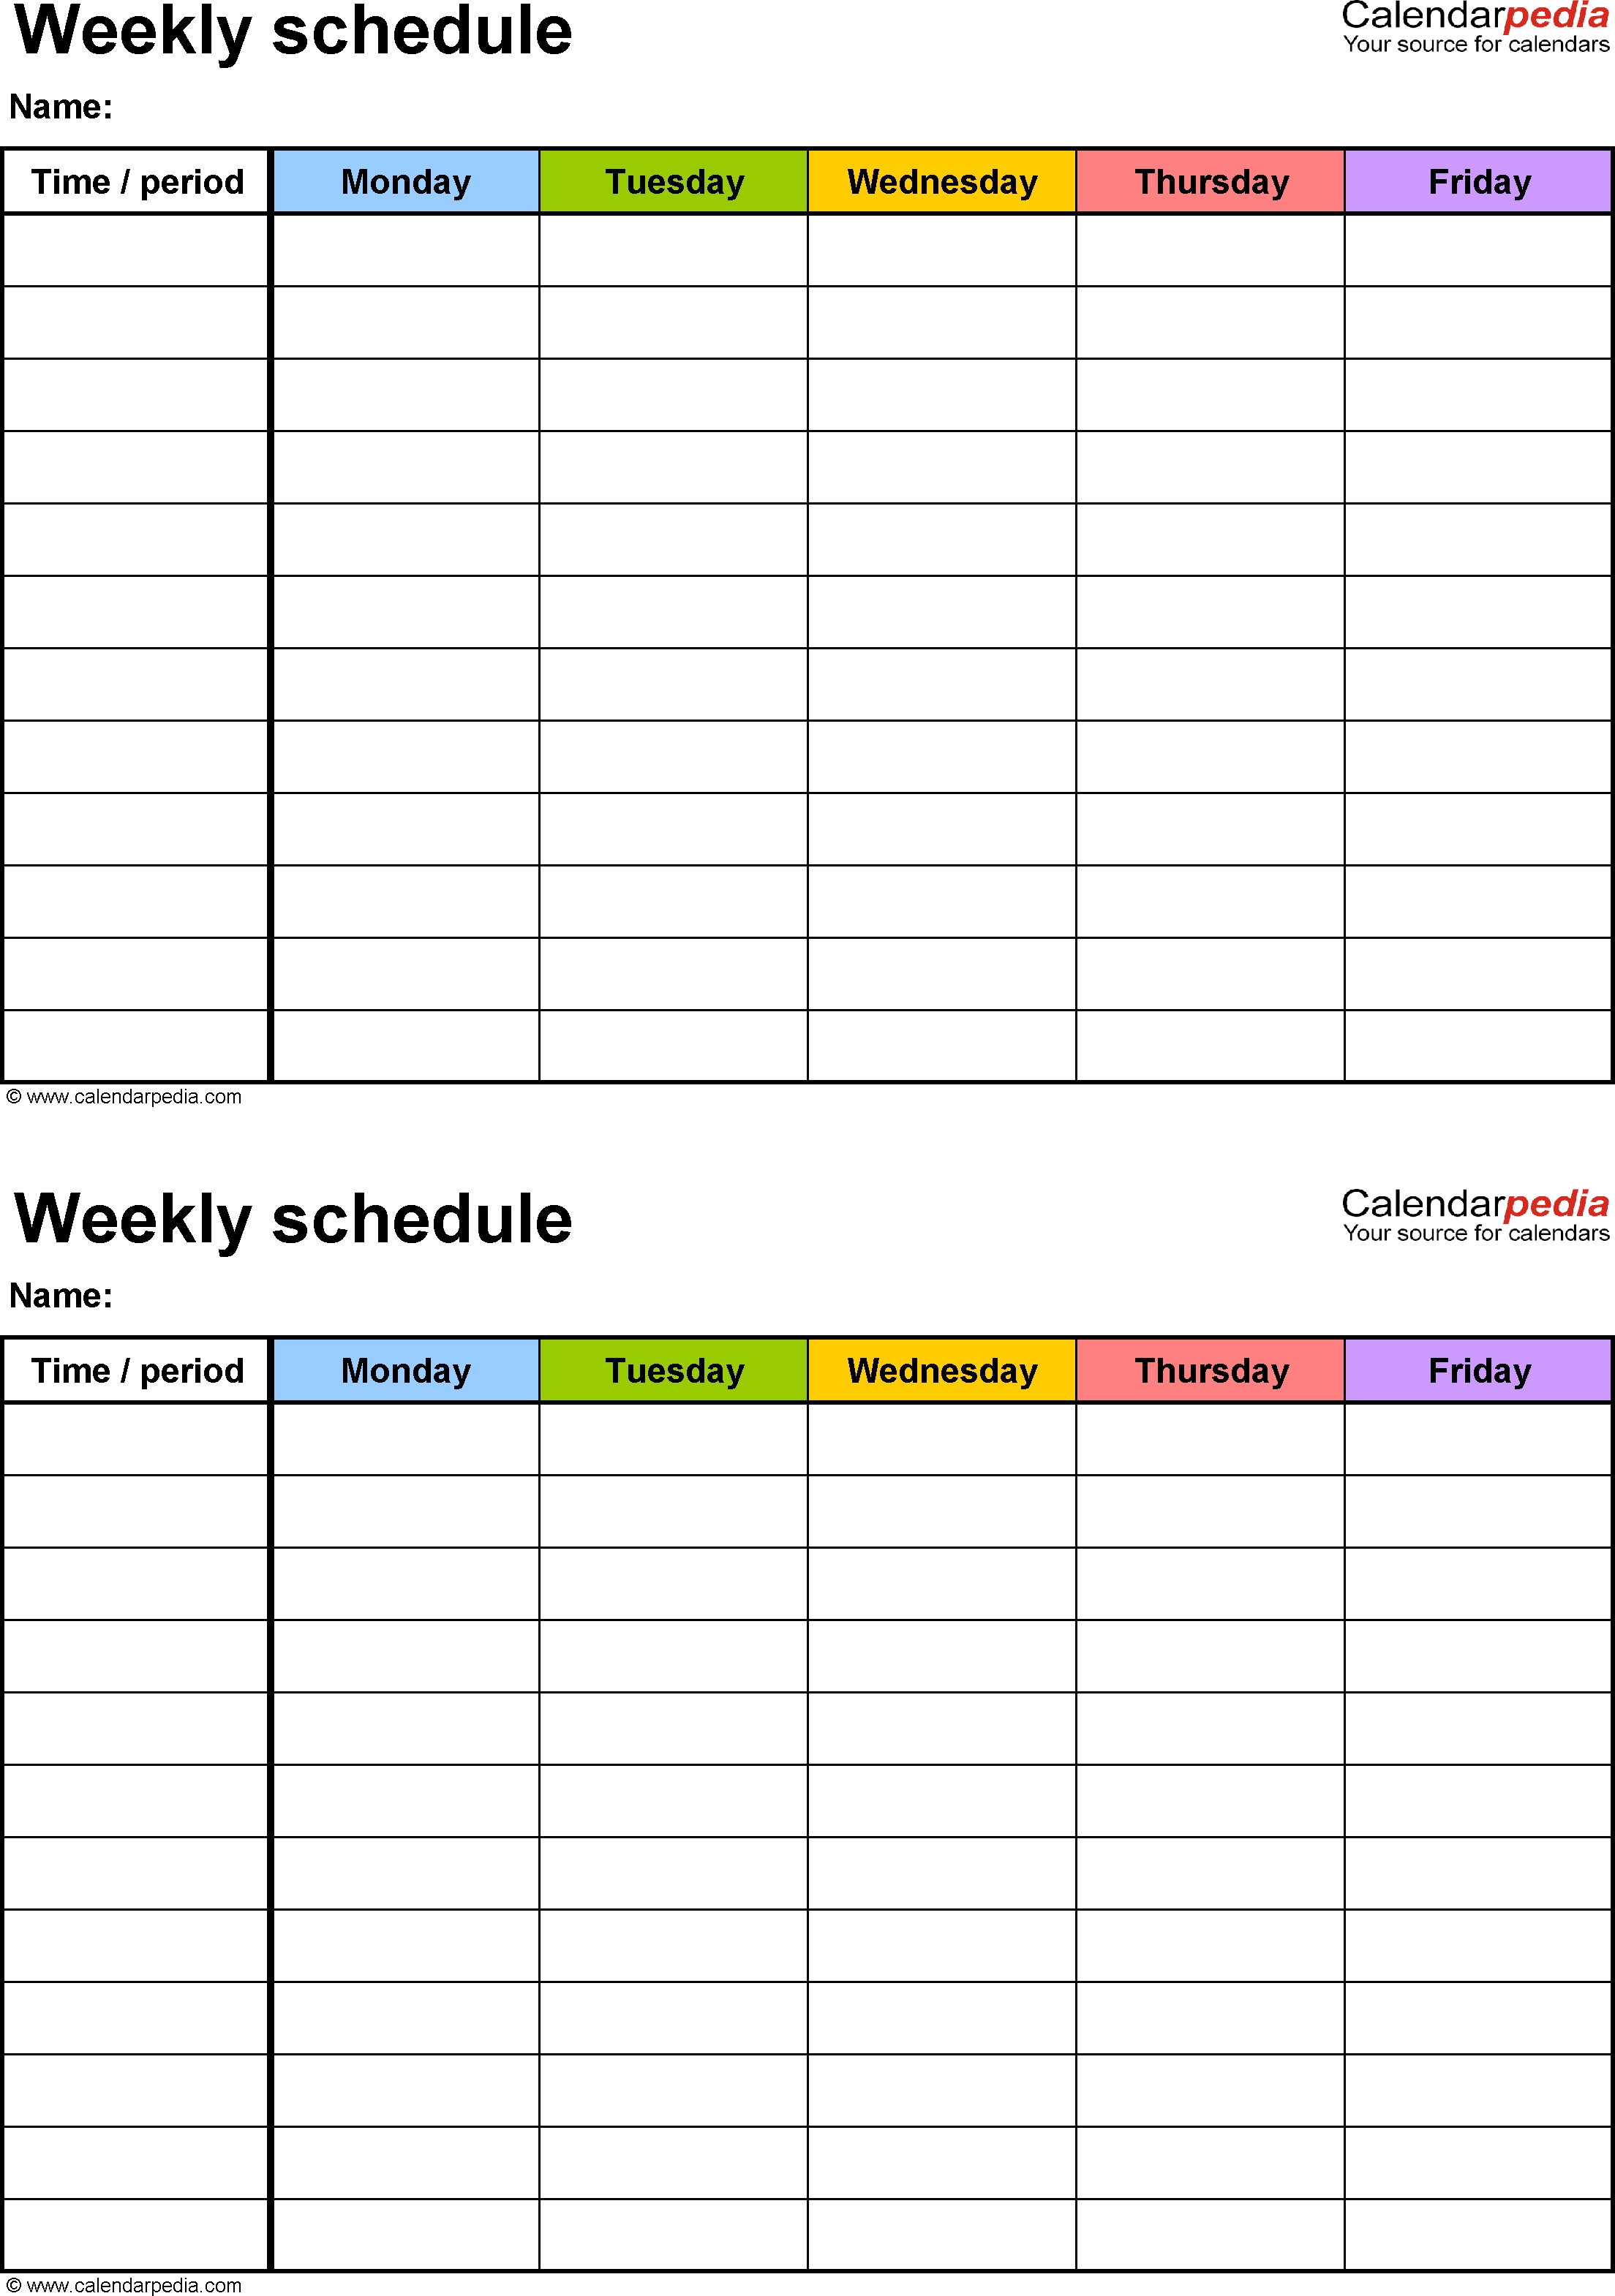 Weekly Schedule Template For Excel Version 3: 2 Schedules On One 5 Day Week Calendar Template Excel